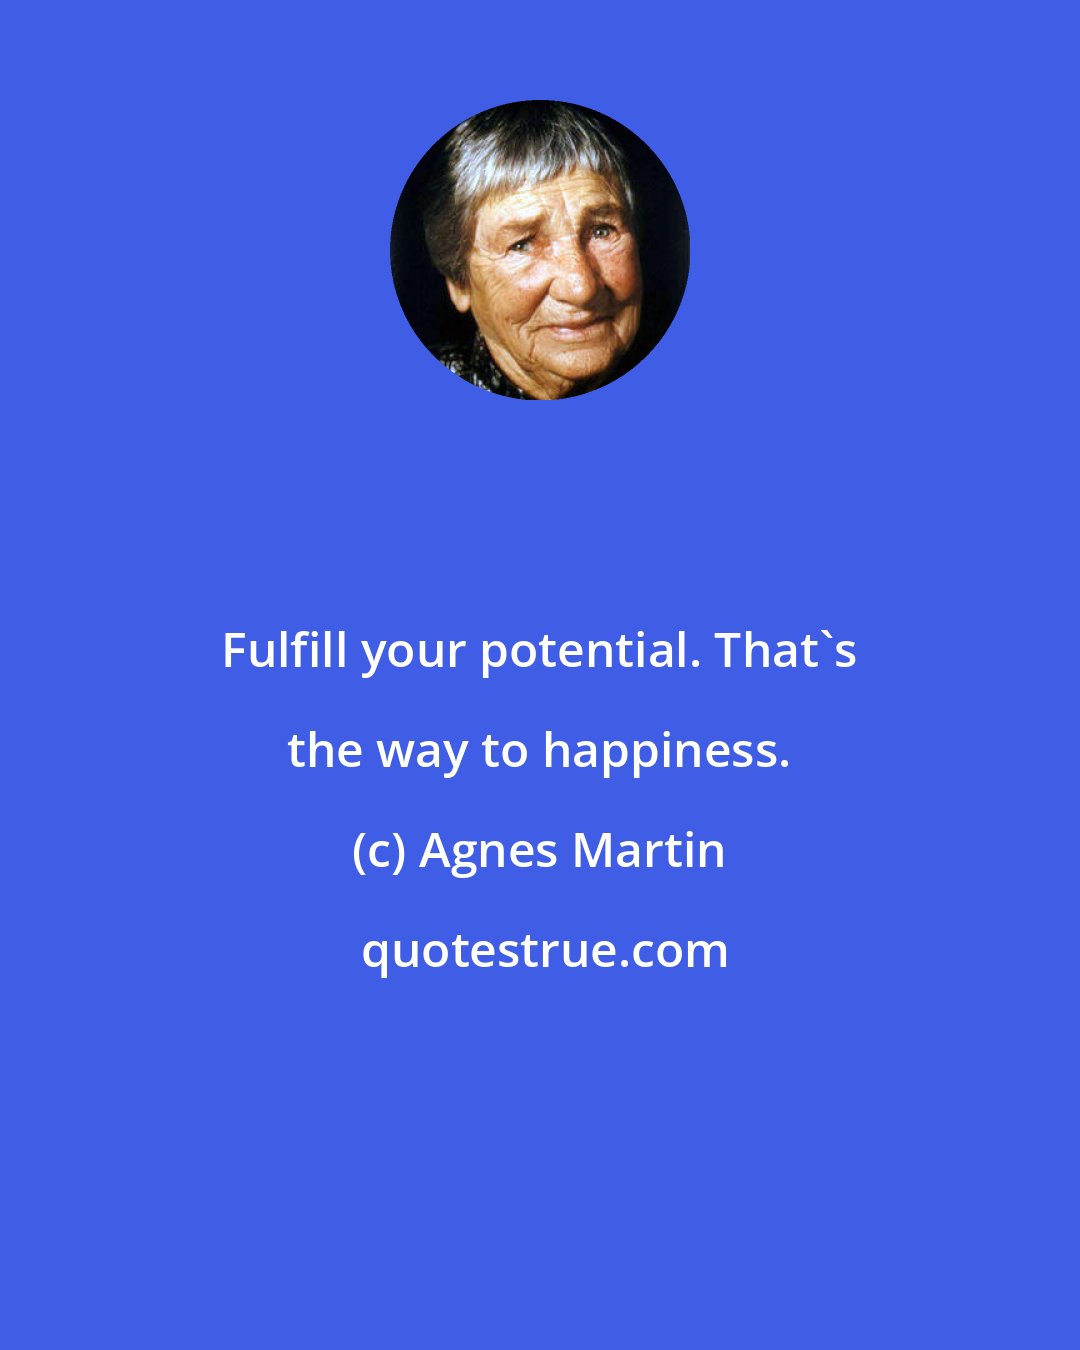 Agnes Martin: Fulfill your potential. That's the way to happiness.